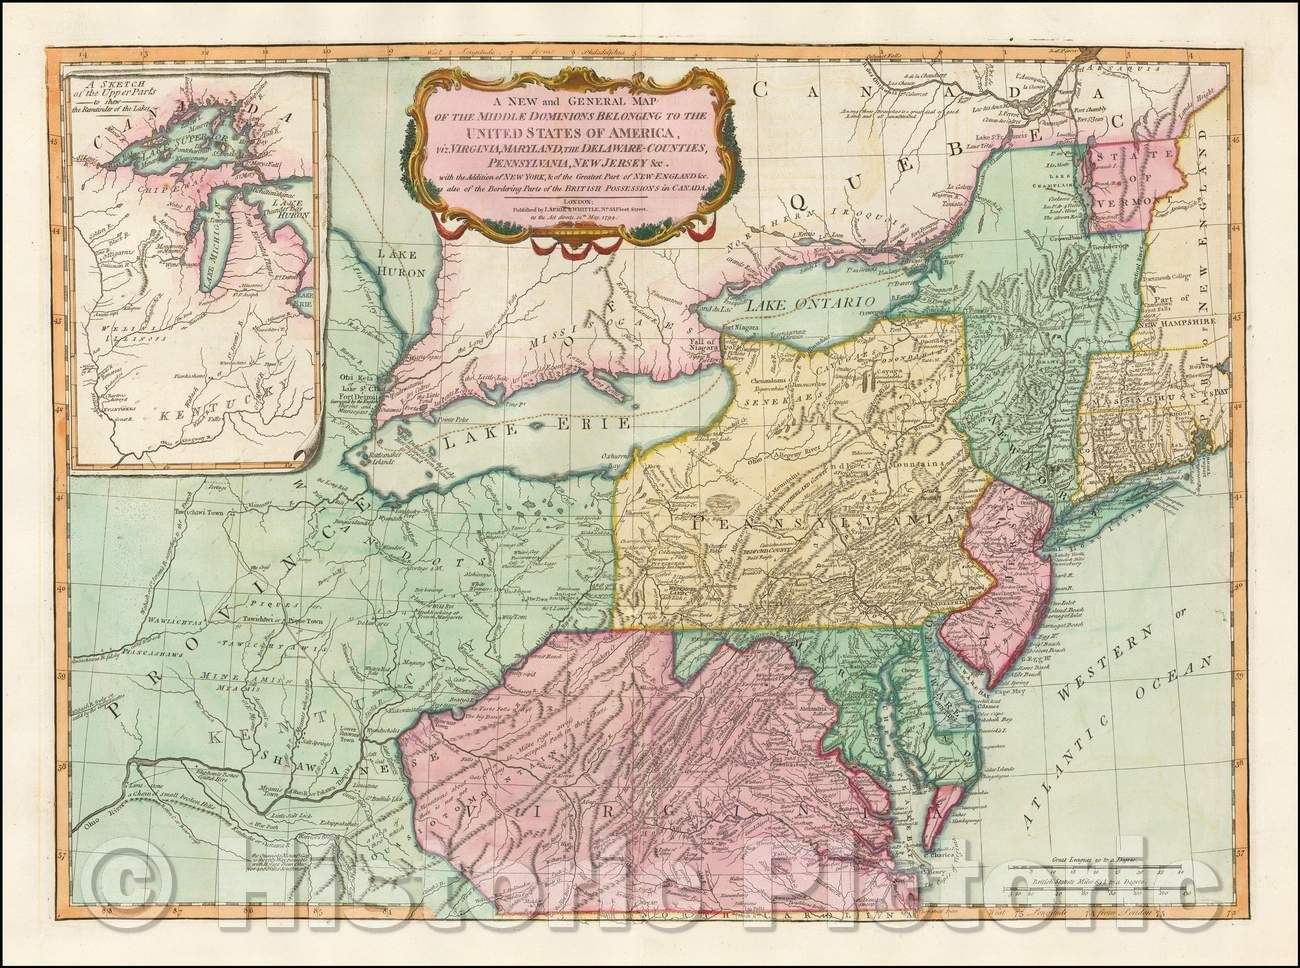 Historic Map - Middle Dominions Belonging to the United States of America, viz. Virginia, Maryland, The Delaware-Counties, Pennsylvania, 1794 v2